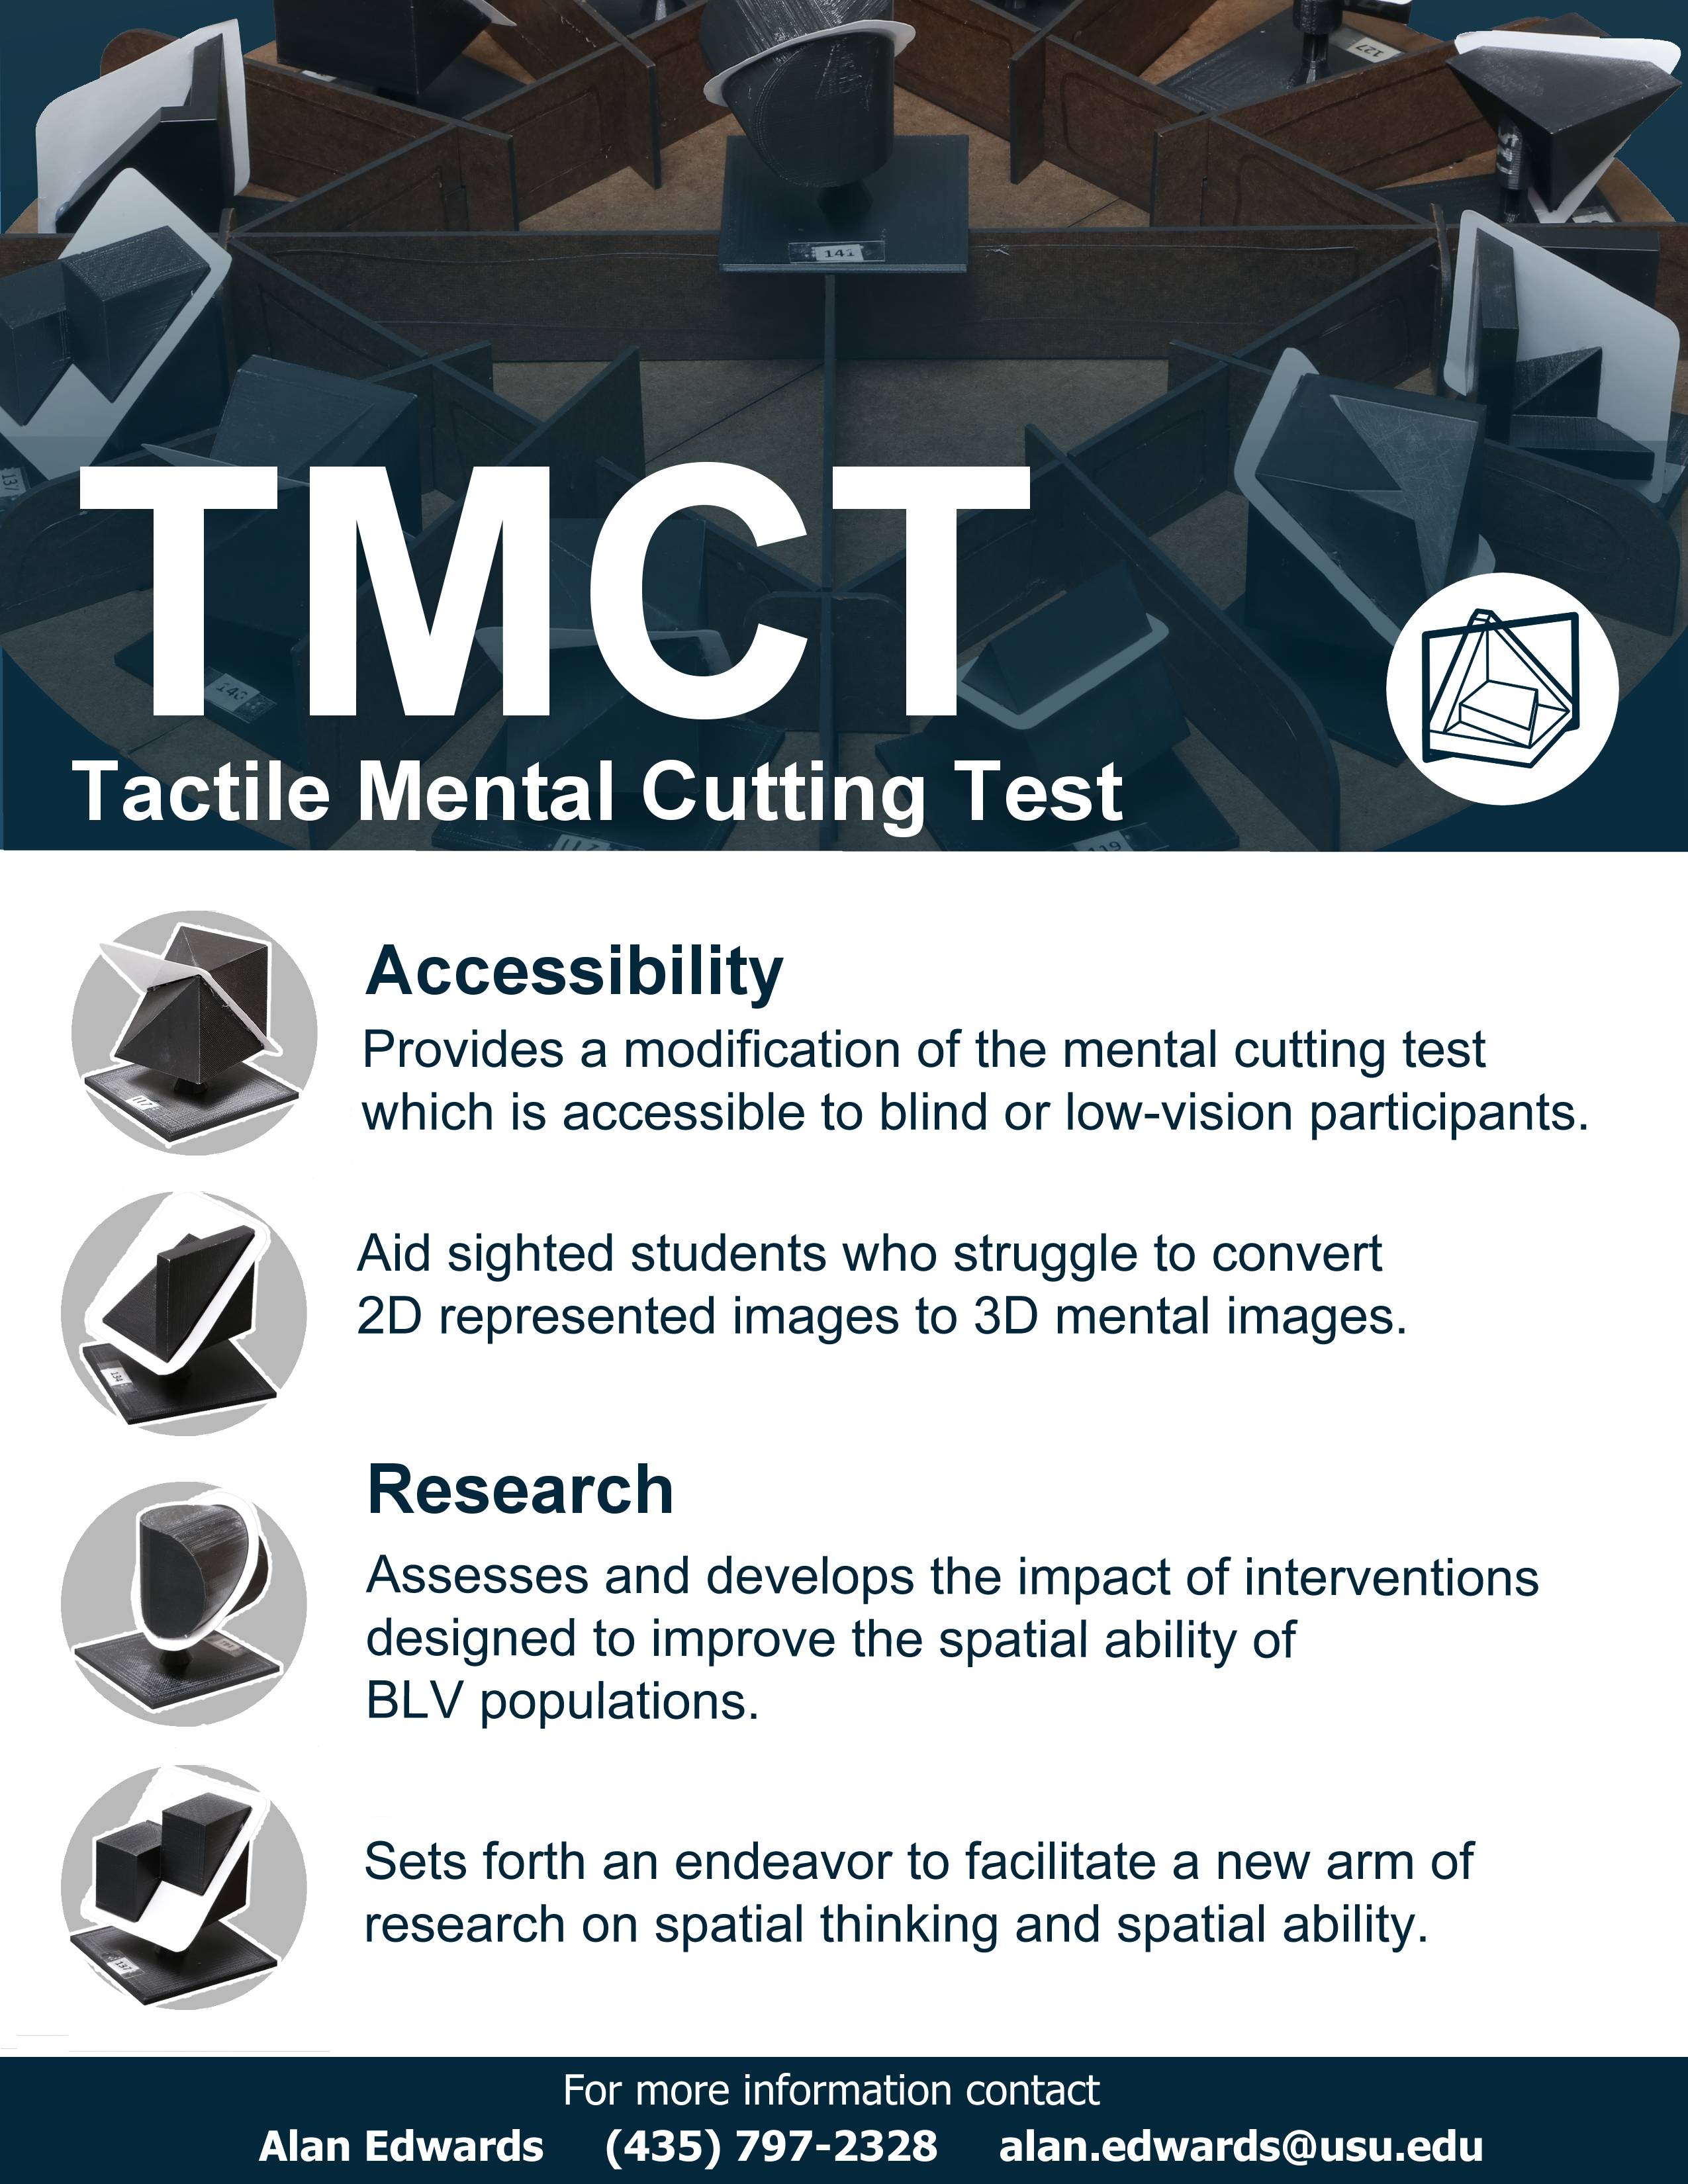 Tactile Mental Cutting Test (TMCT) advertisement--improves accessibility for blind or low-vision participants, and assesses and develops the impact of interventions on the blind and low-vision population